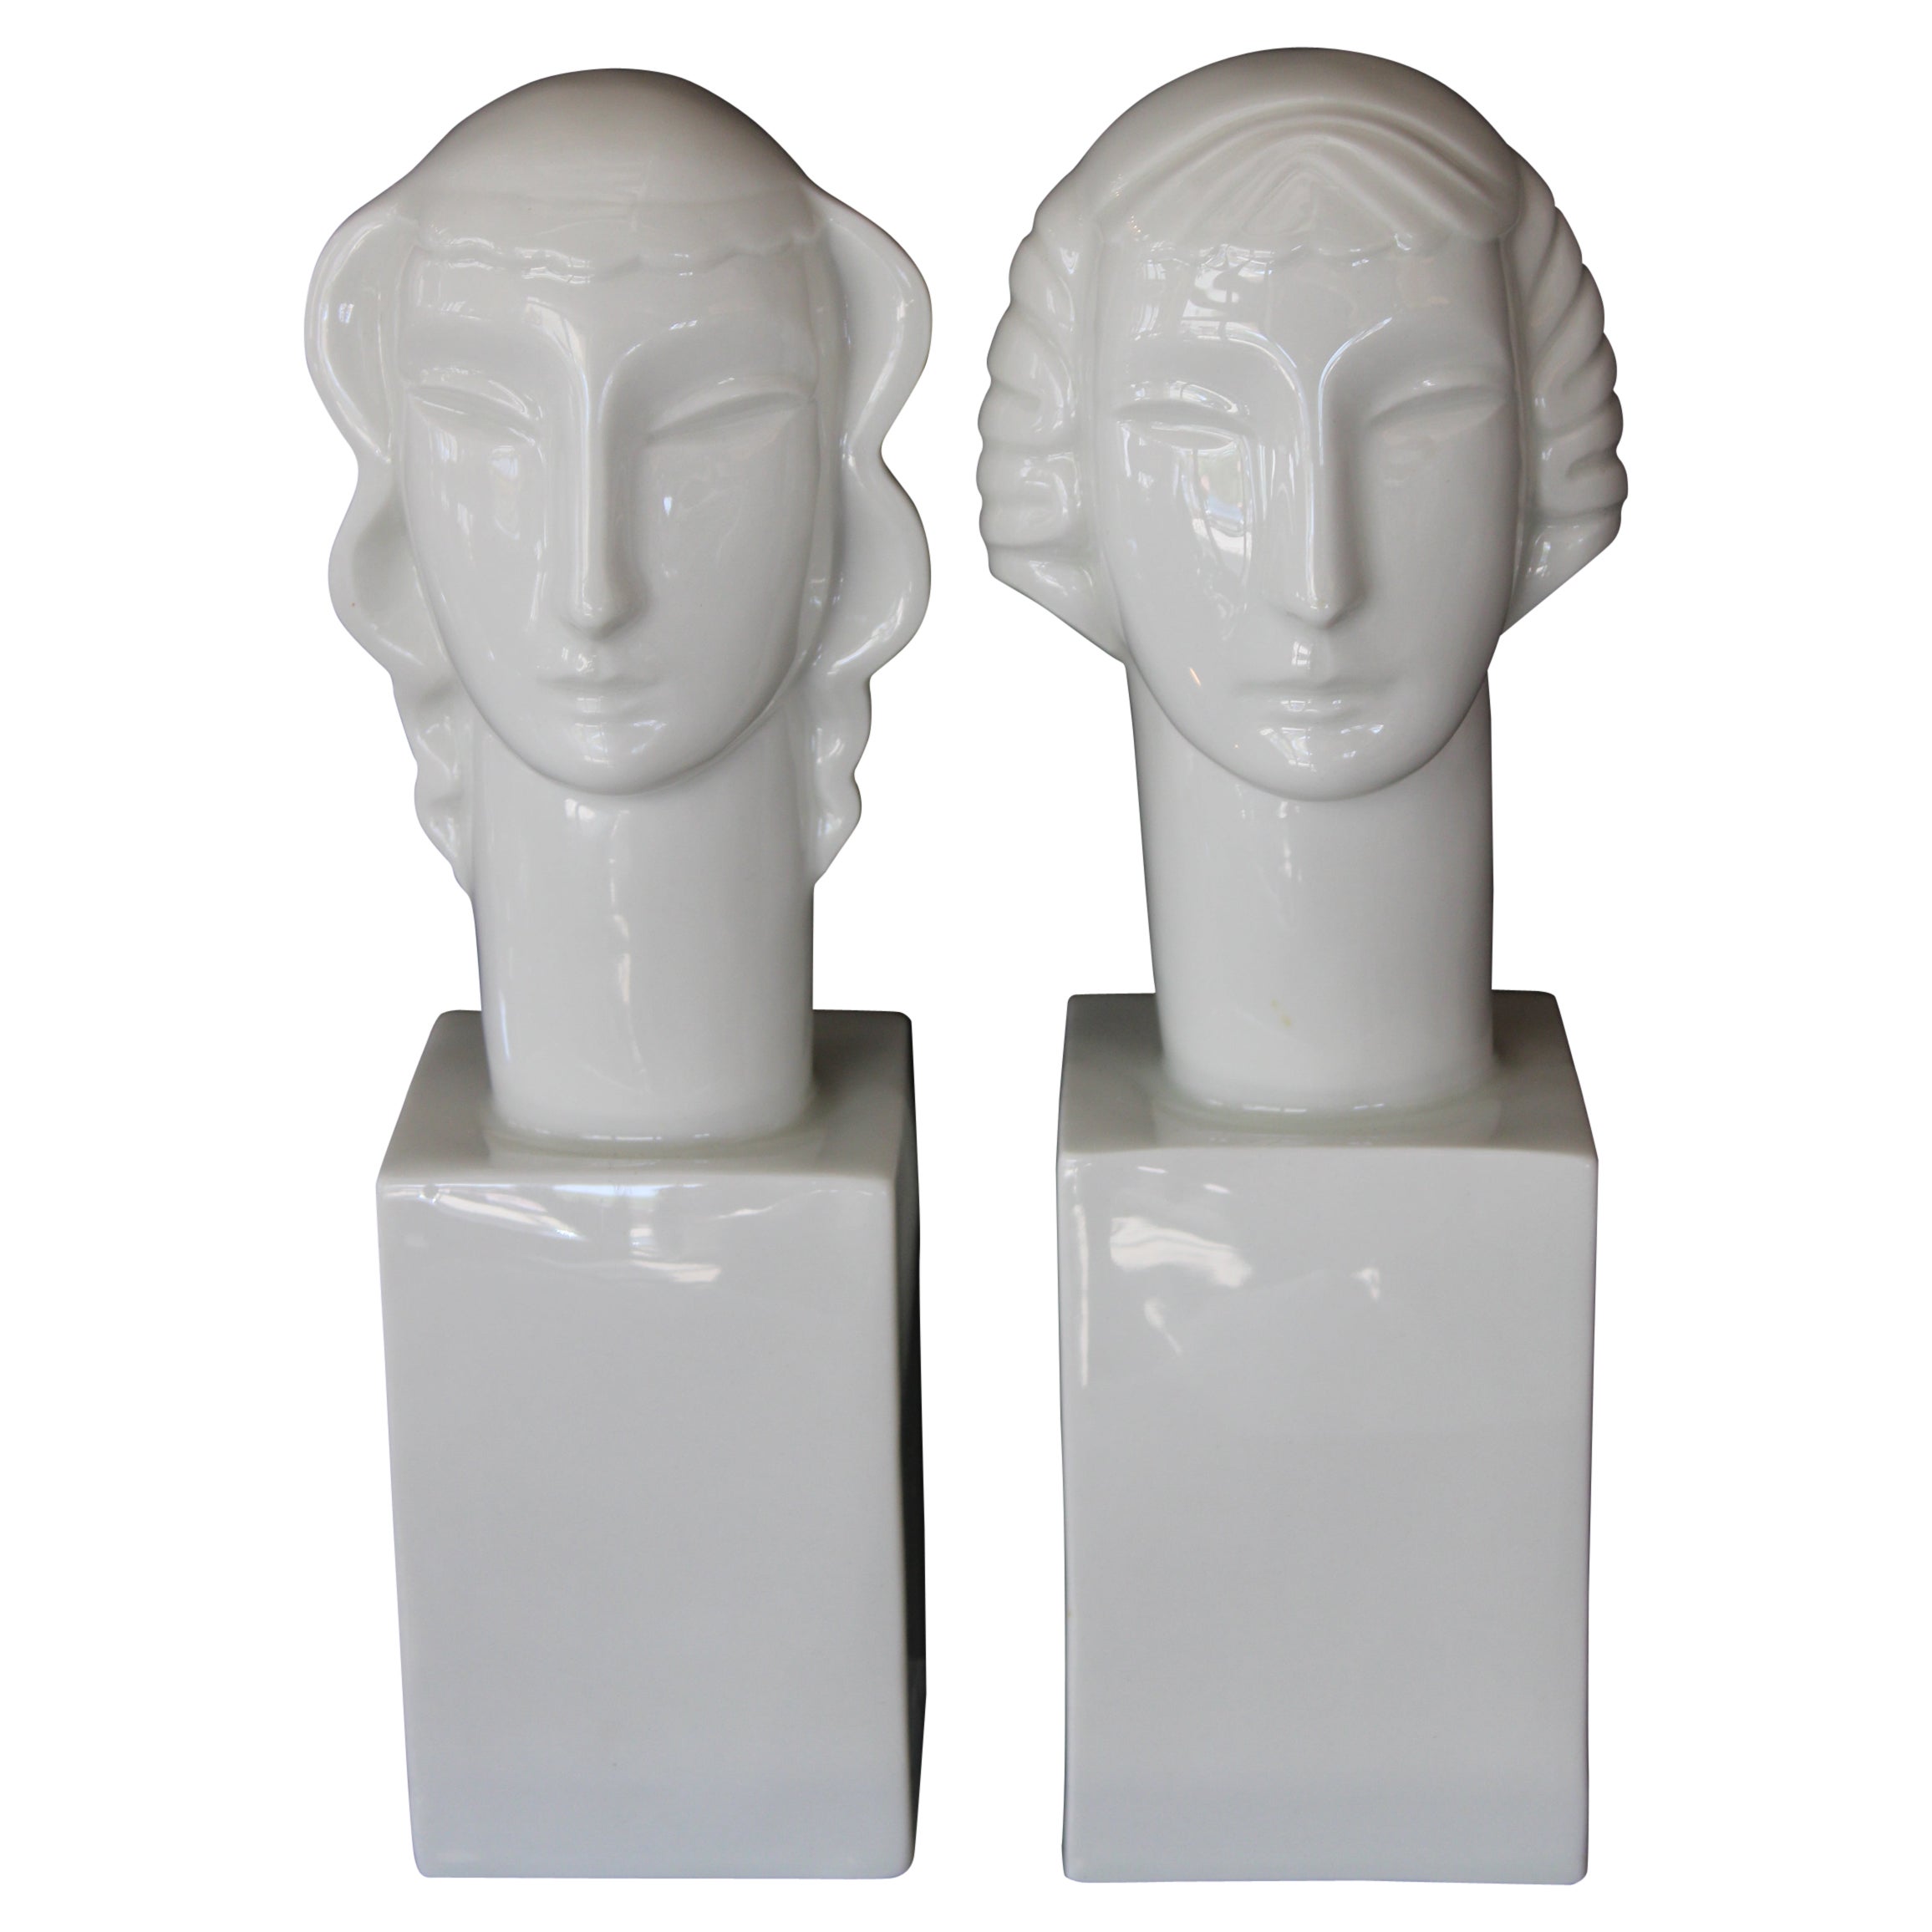 Pair of Porcelain Busts by Geza de Vegh for Lamberton Scammell For Sale